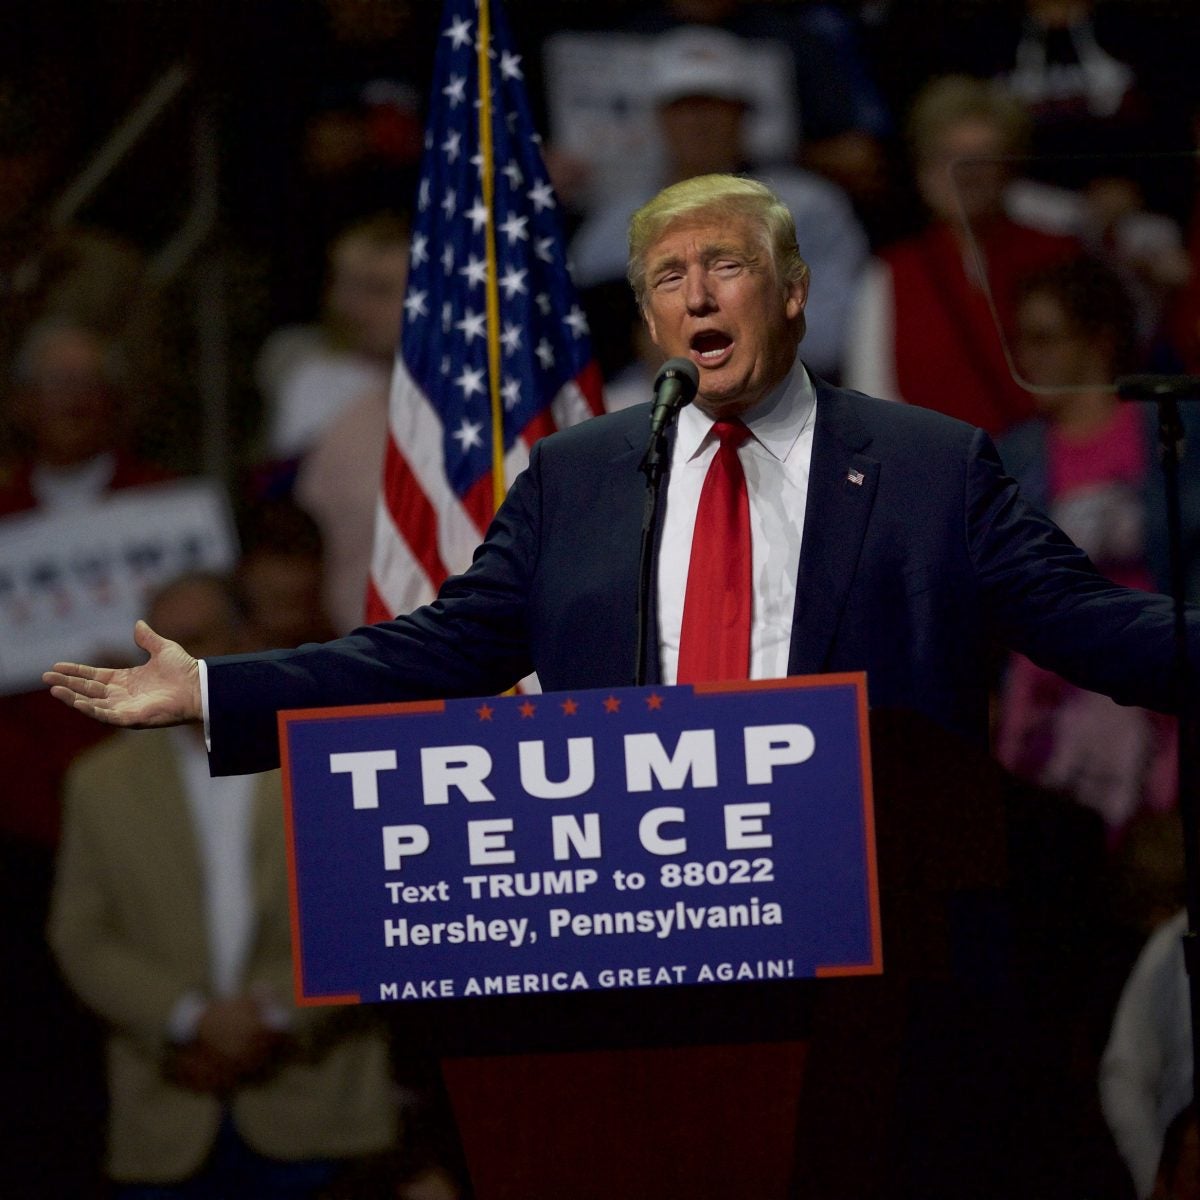 New Report Suggests 2016 Trump Campaign Intentionally Deterred Black Voters